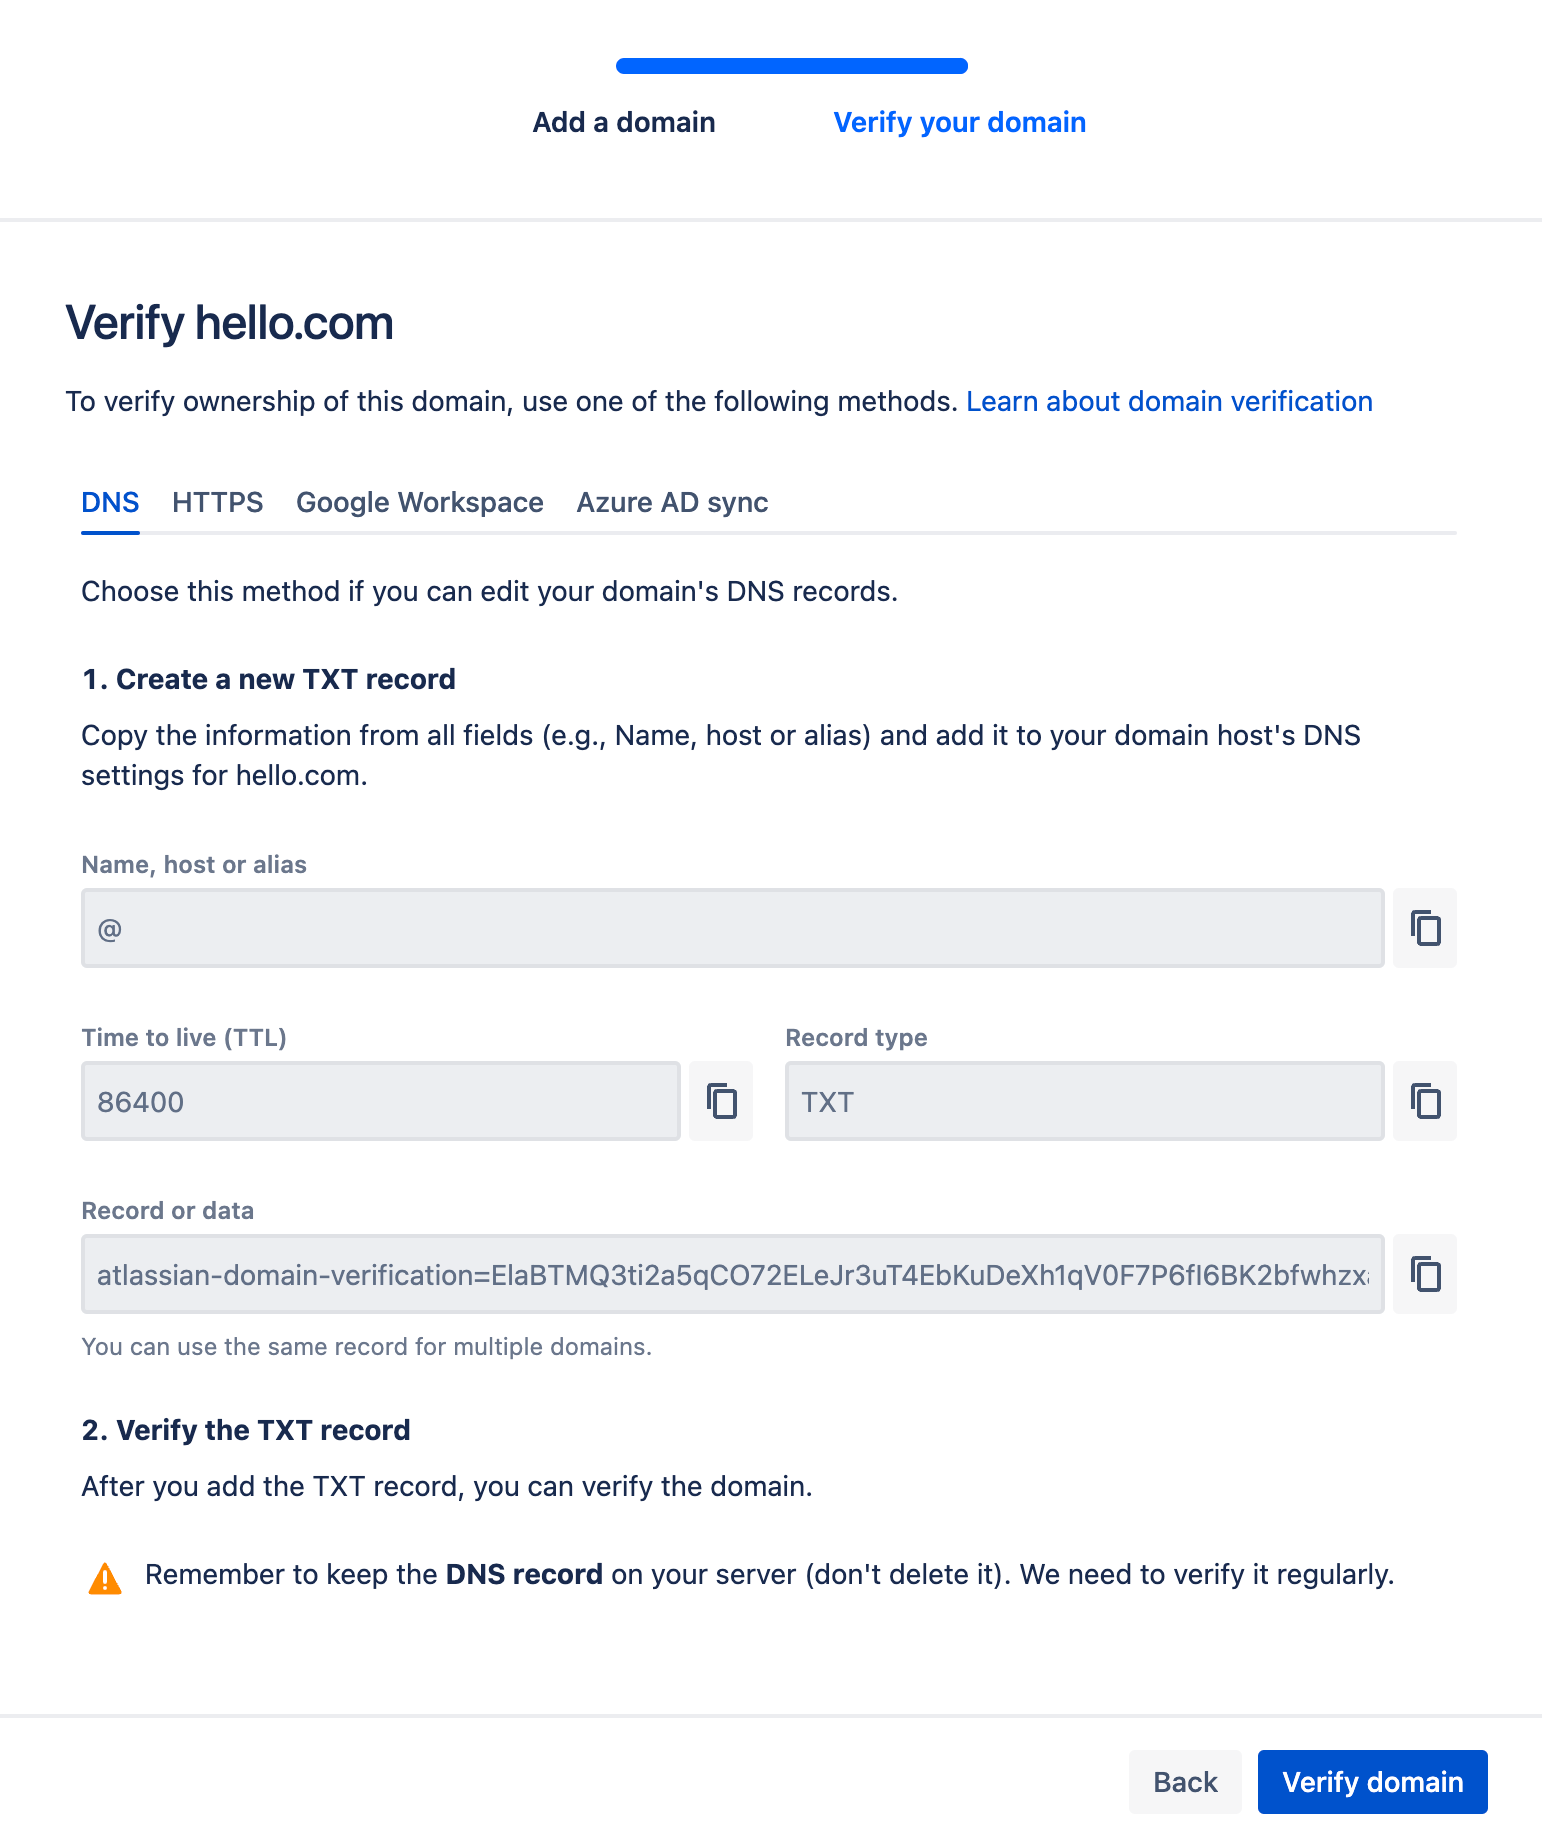 Verify domain screen where you enter a domain and we check to verify your ownership of the dokmain